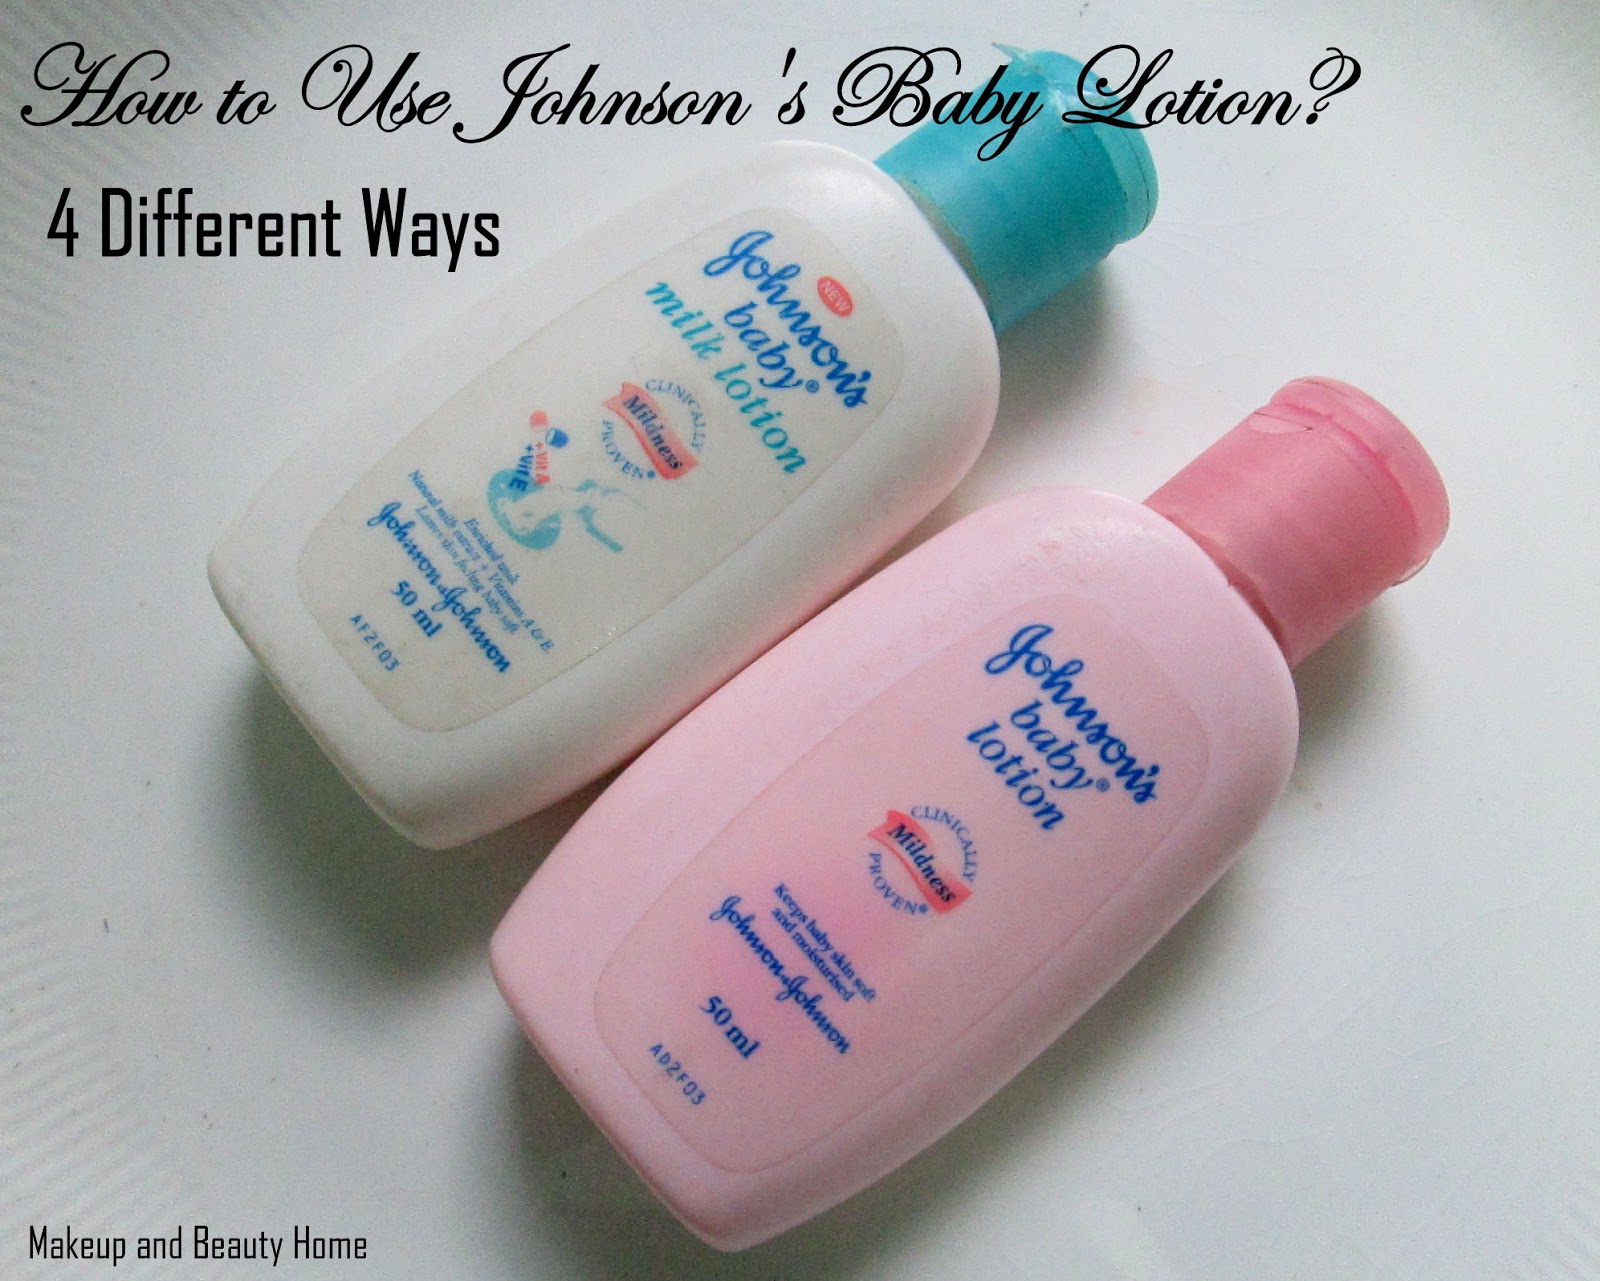 best baby lotion for fairness